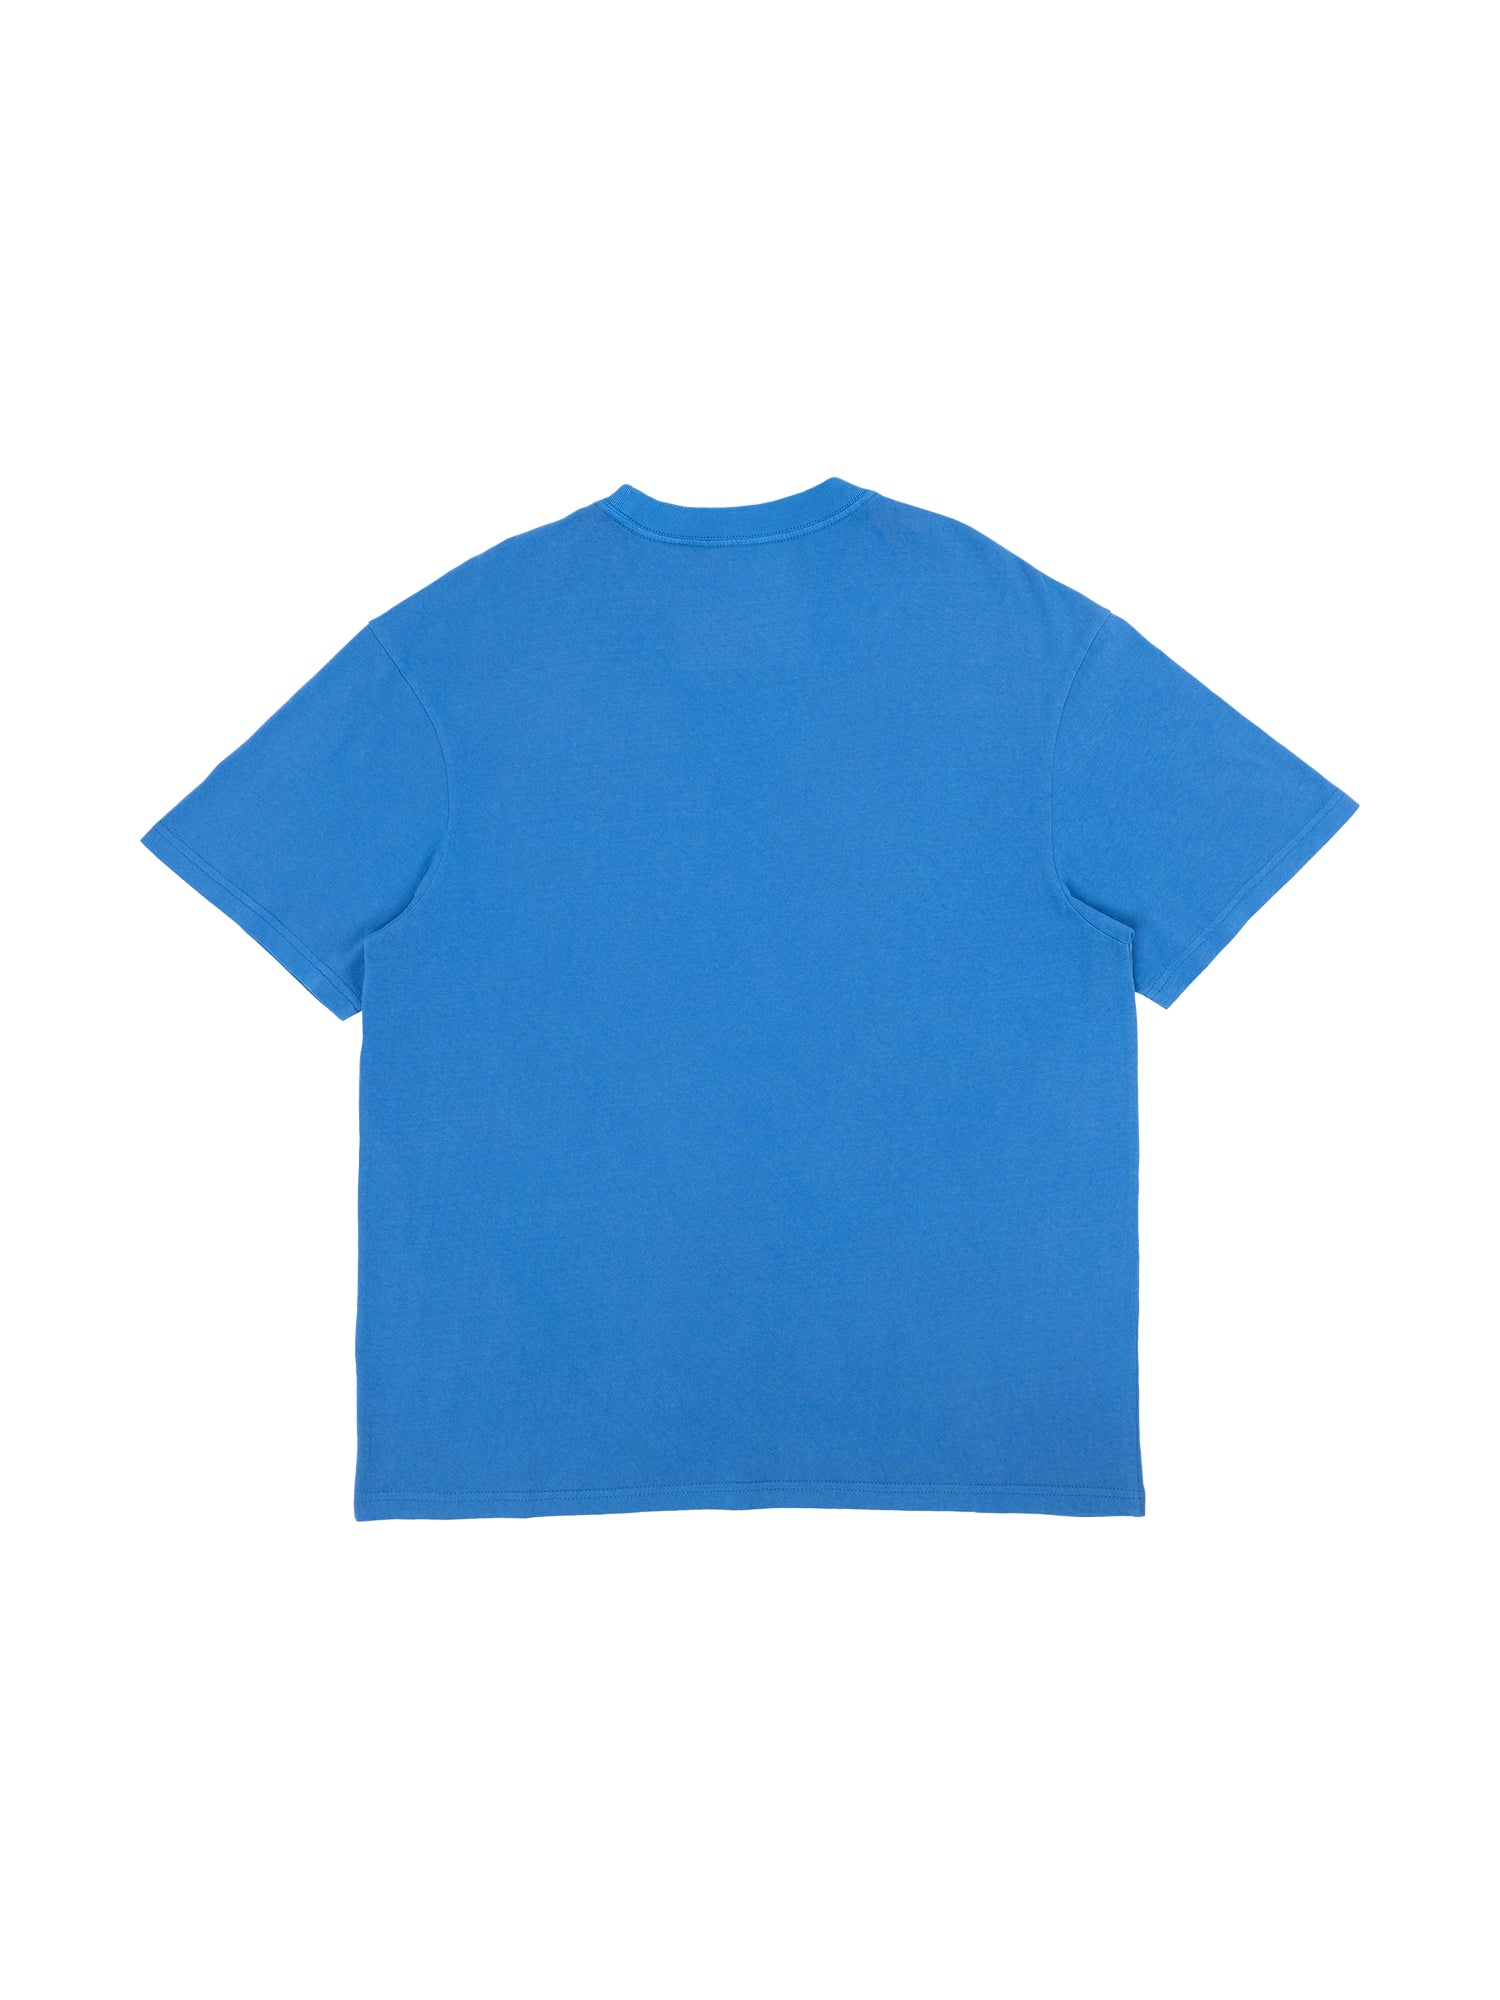 MNA-R19 (Incline stack tee magc faded royal) 32293478 MITCHELL AND NESS